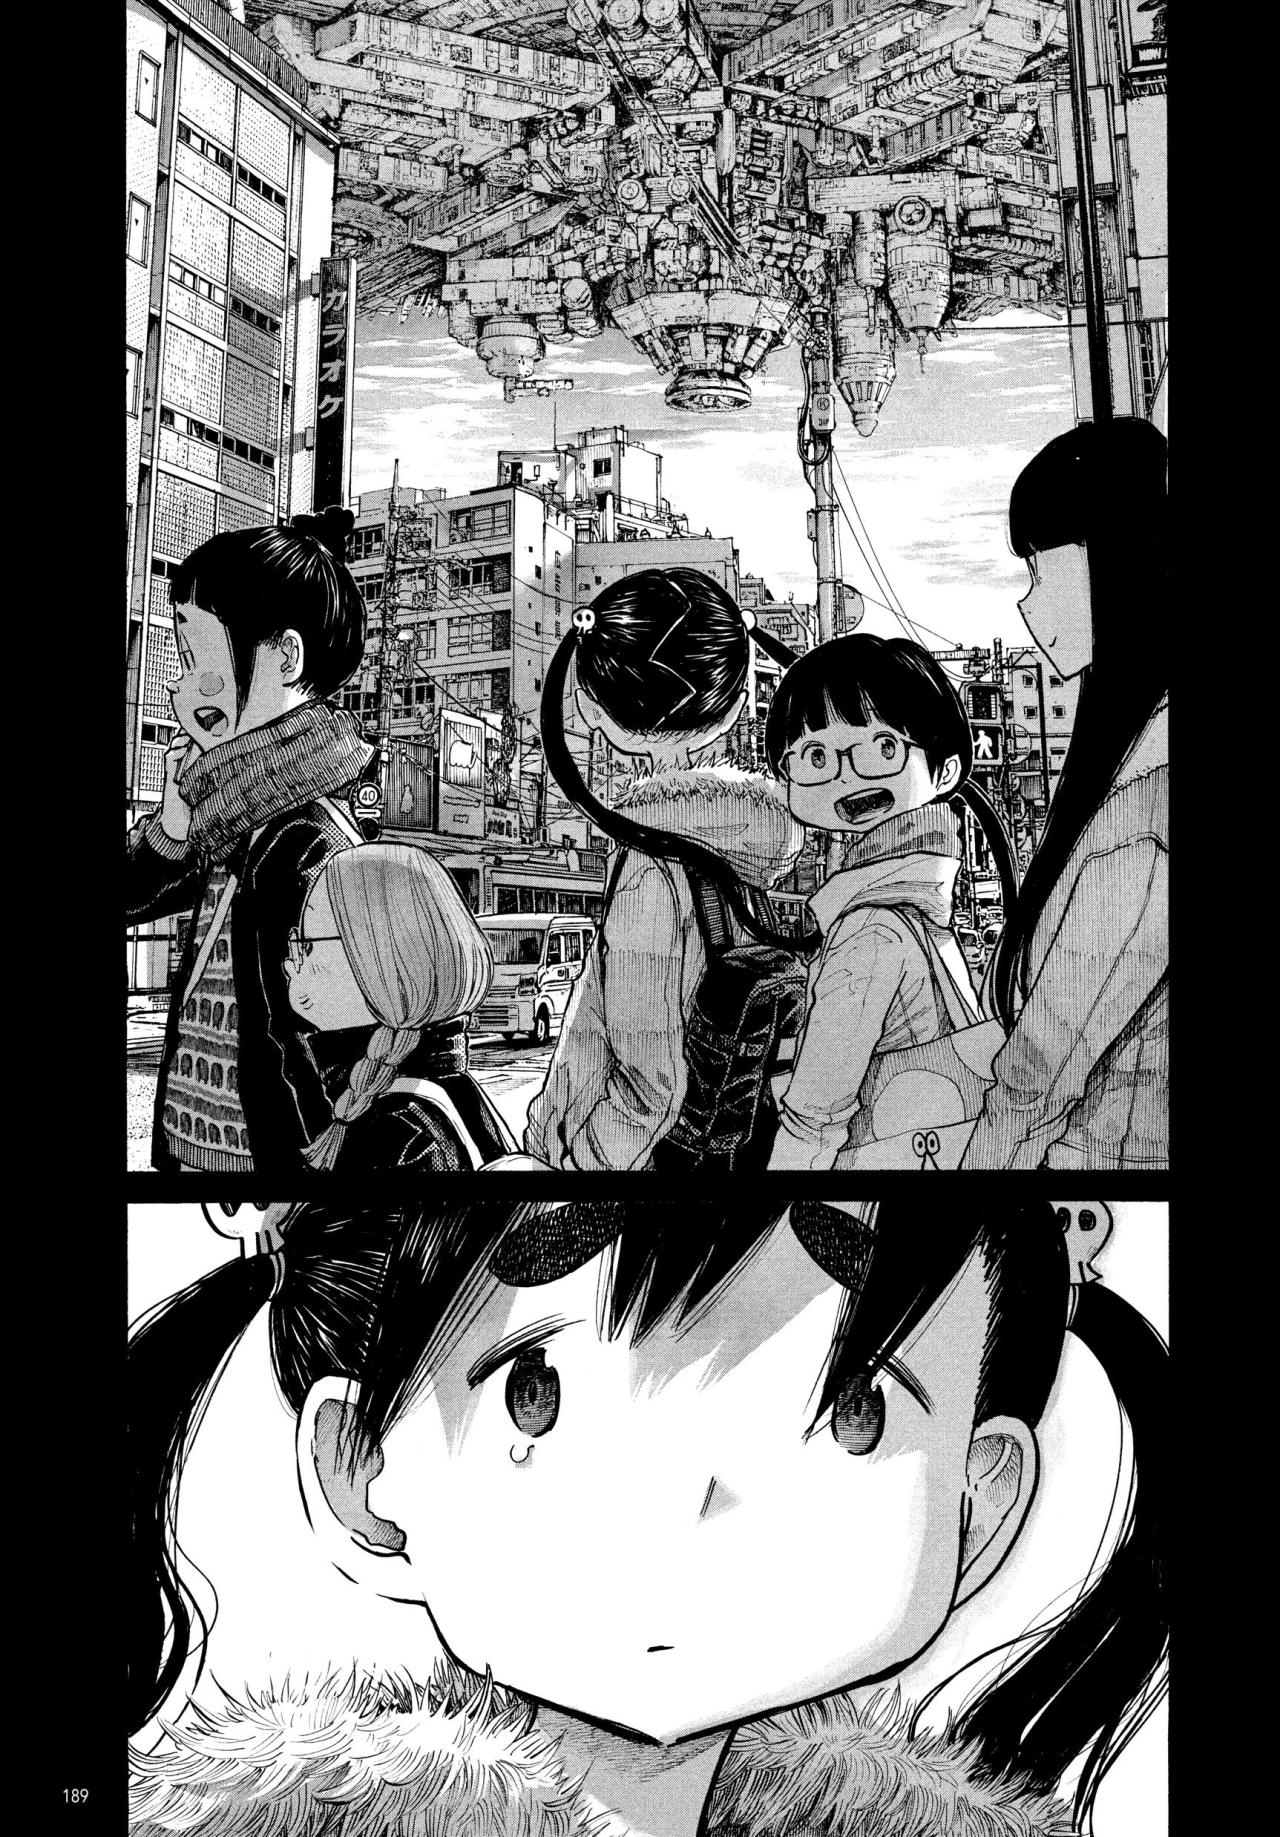 Asano posting — Extra page from vol 9 by Inio Asano